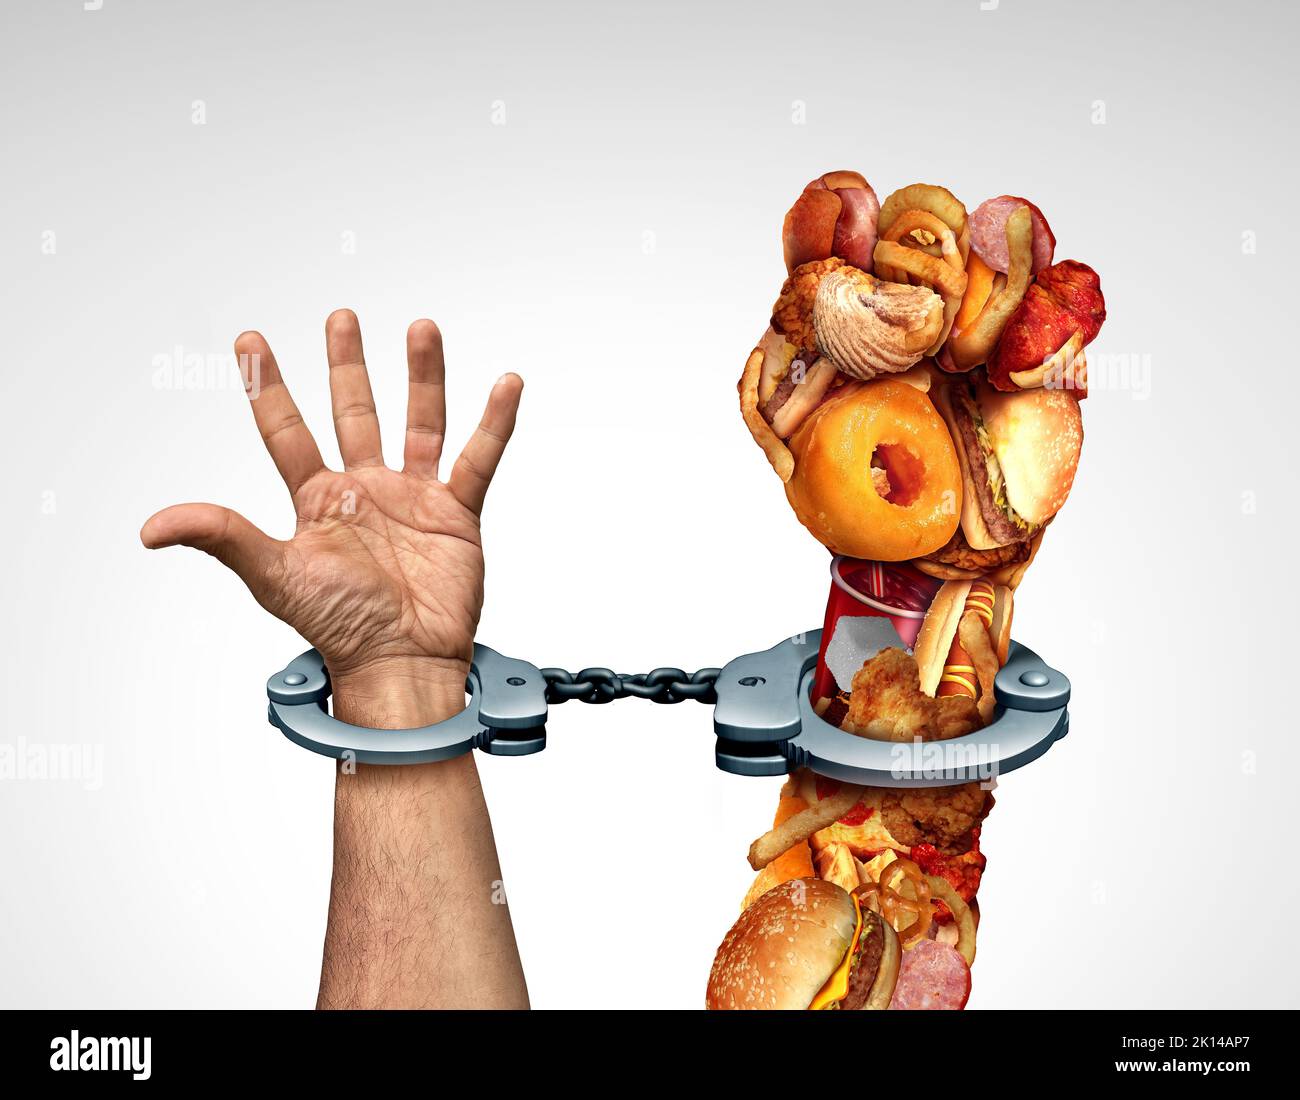 Fast Food Trap and being trapped by unhealthy junkfood as hamburgers and hot dogs with fries shaped as hands handcuffed as a prisoner of fat. Stock Photo